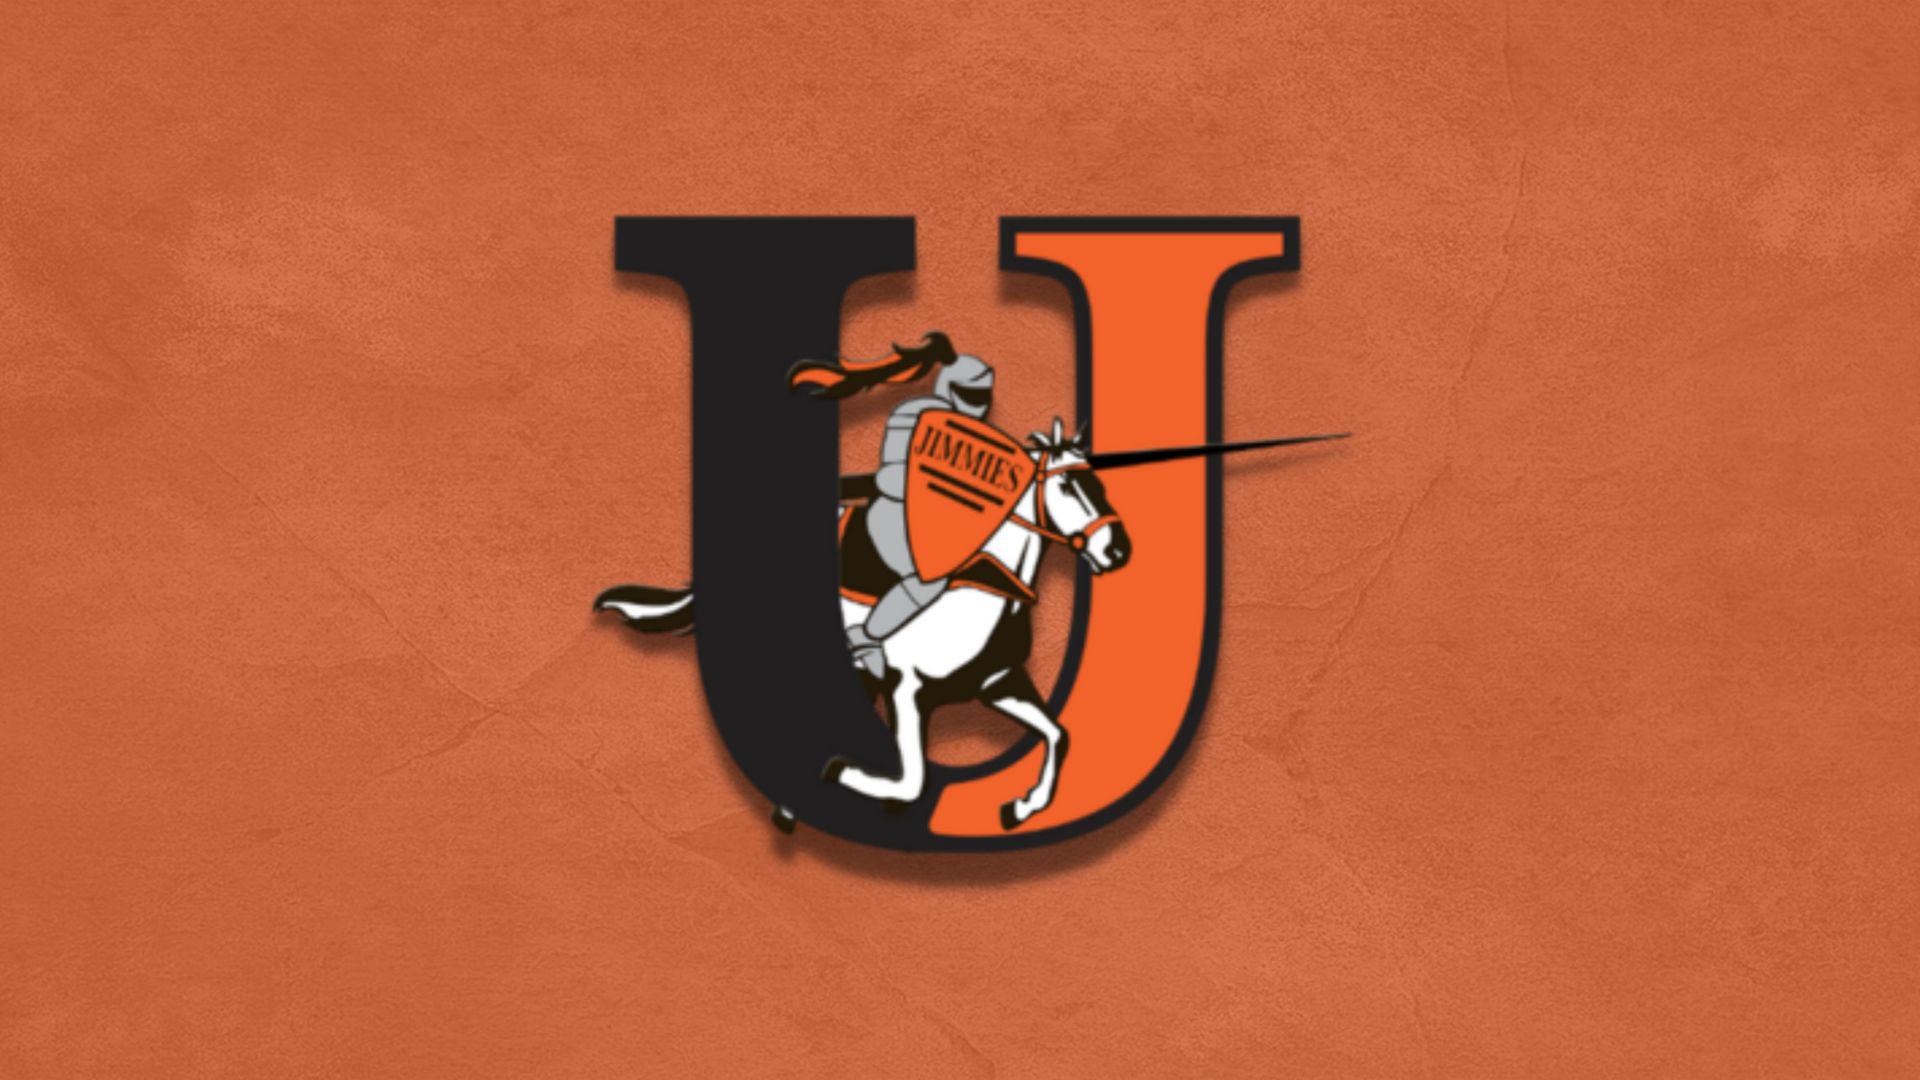 Casey Bruggeman Named Head Basketball Coach at University of Jamestown with Impressive Track Record